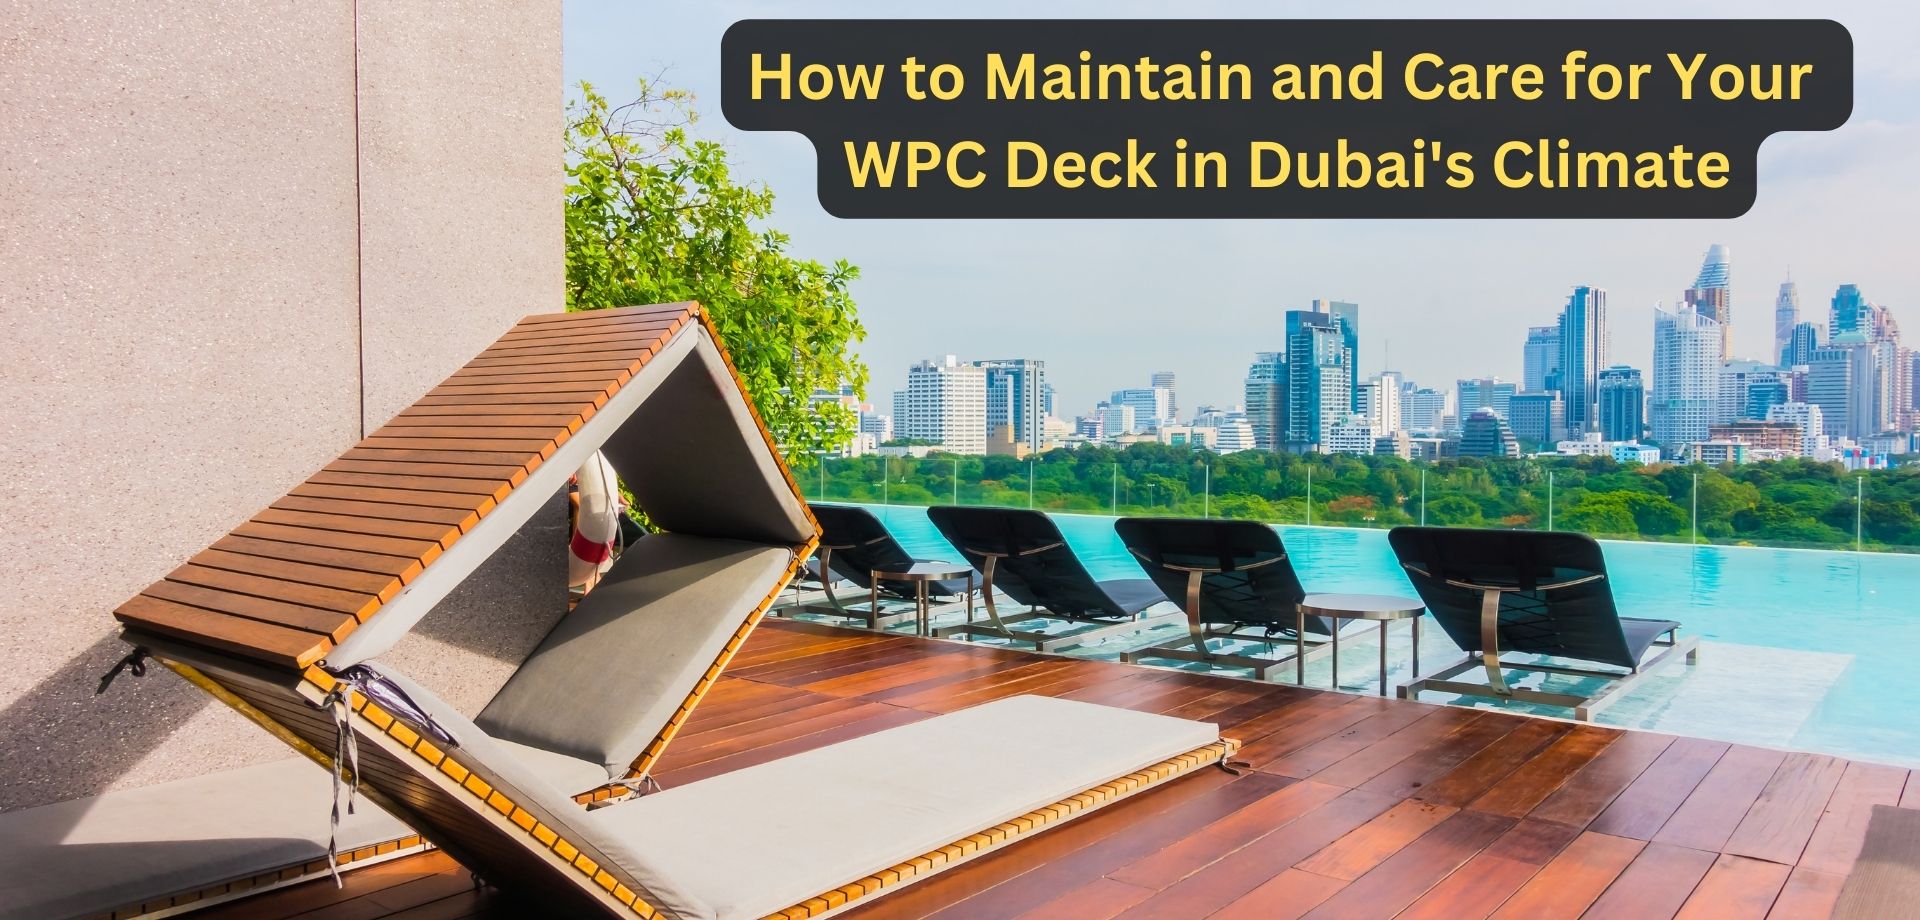 How to Maintain and Care for Your WPC Deck in Dubai's Climate